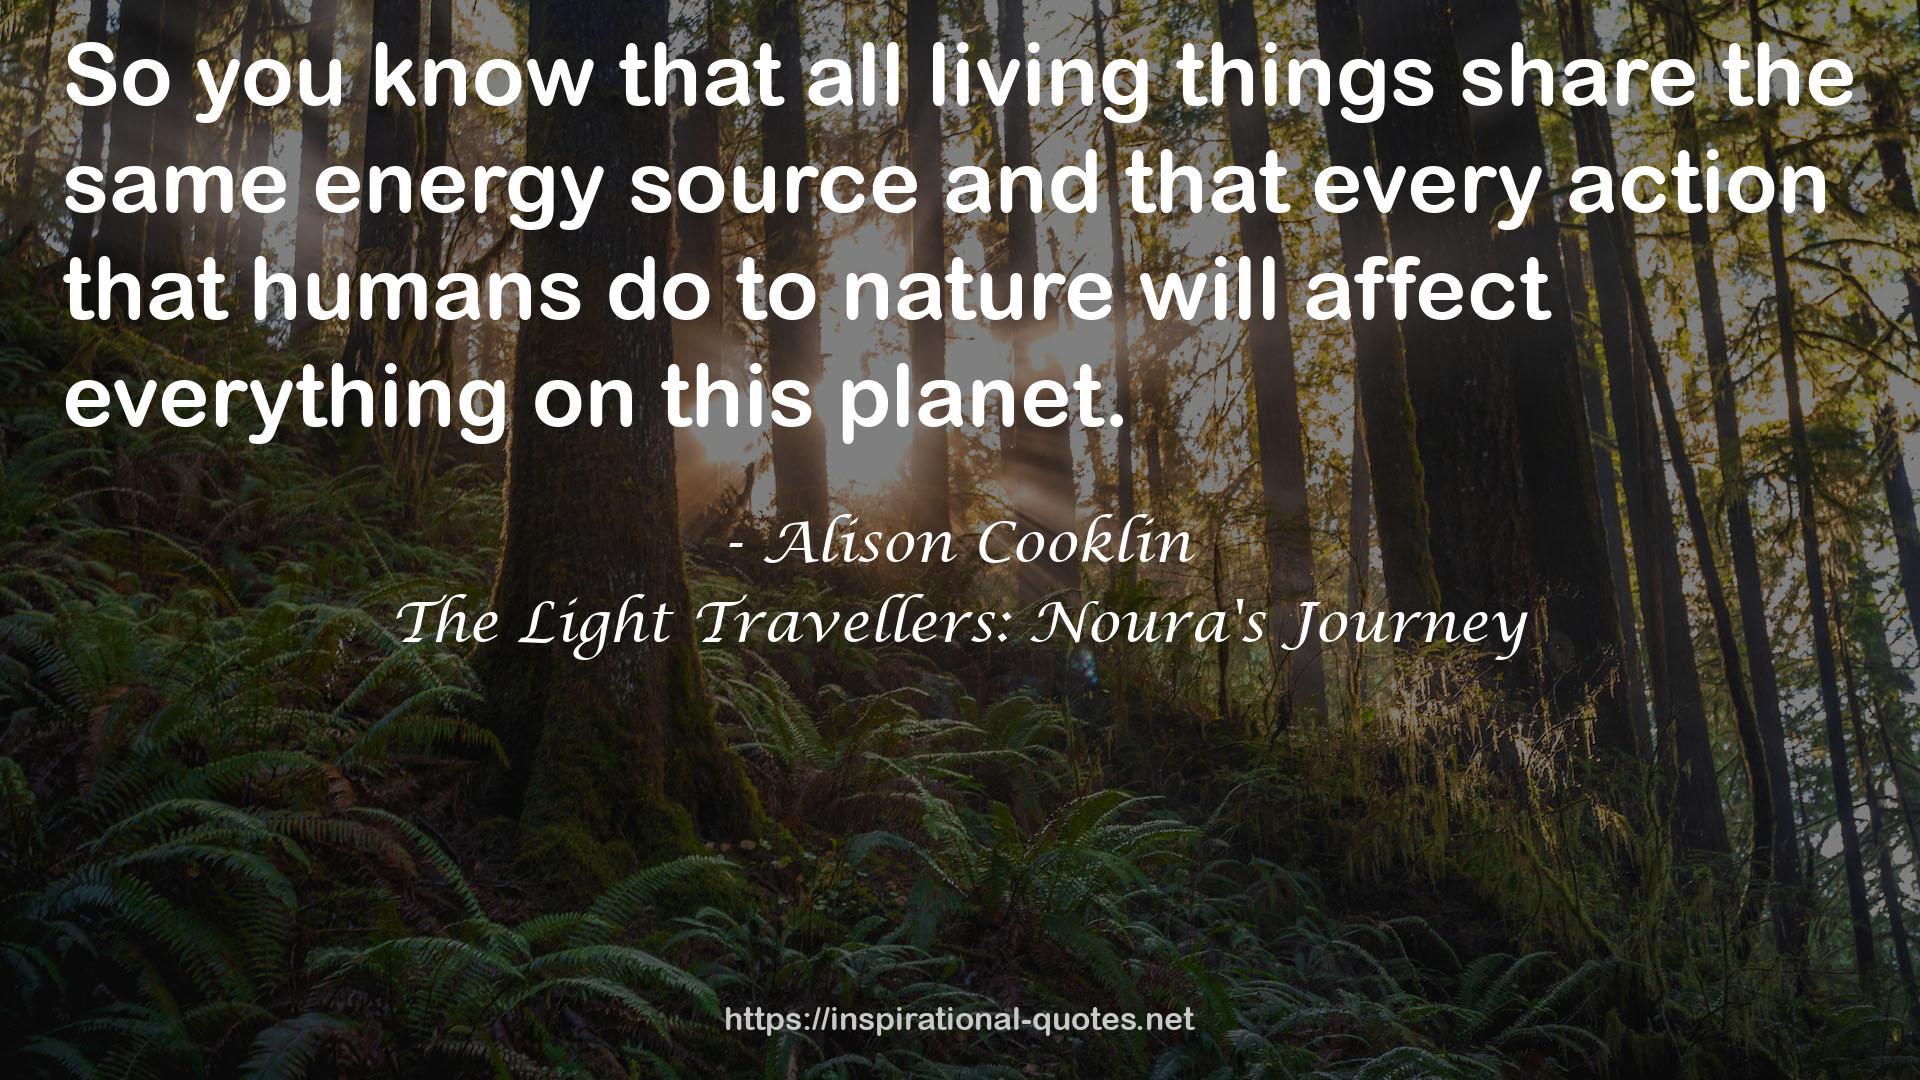 The Light Travellers: Noura's Journey QUOTES